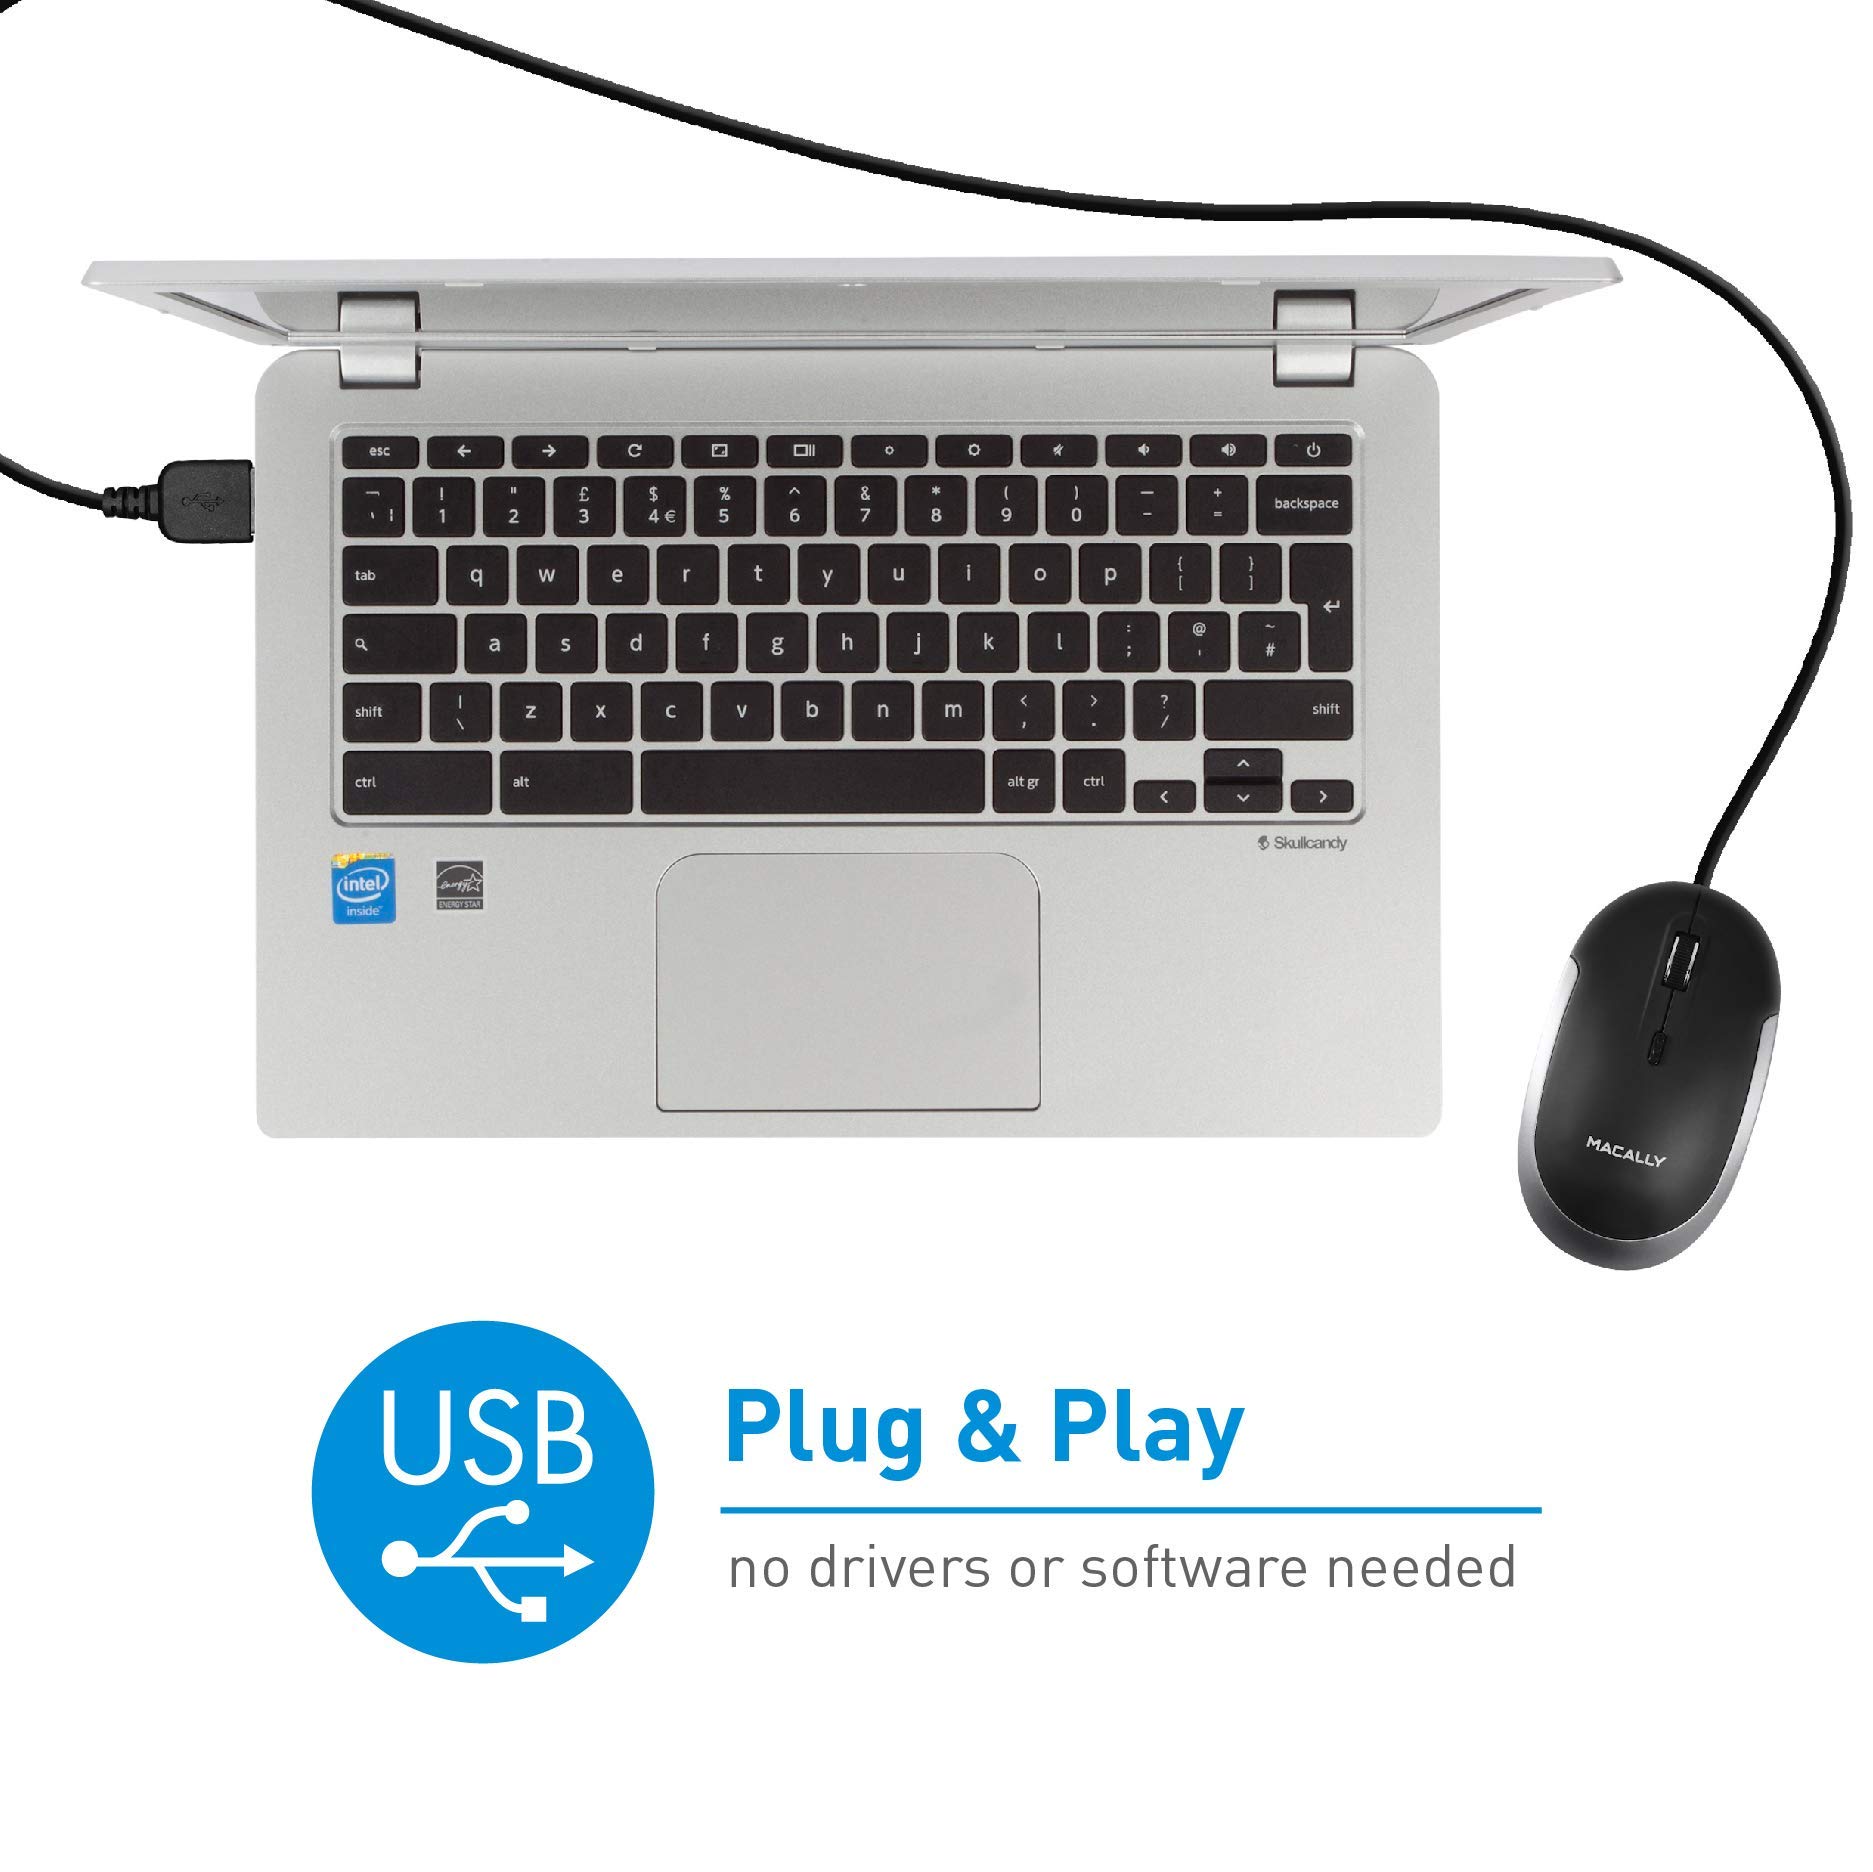 Macally Ultra Slim Wired Computer Keyboard and Silent Wired Mouse, Match with Your MacBook